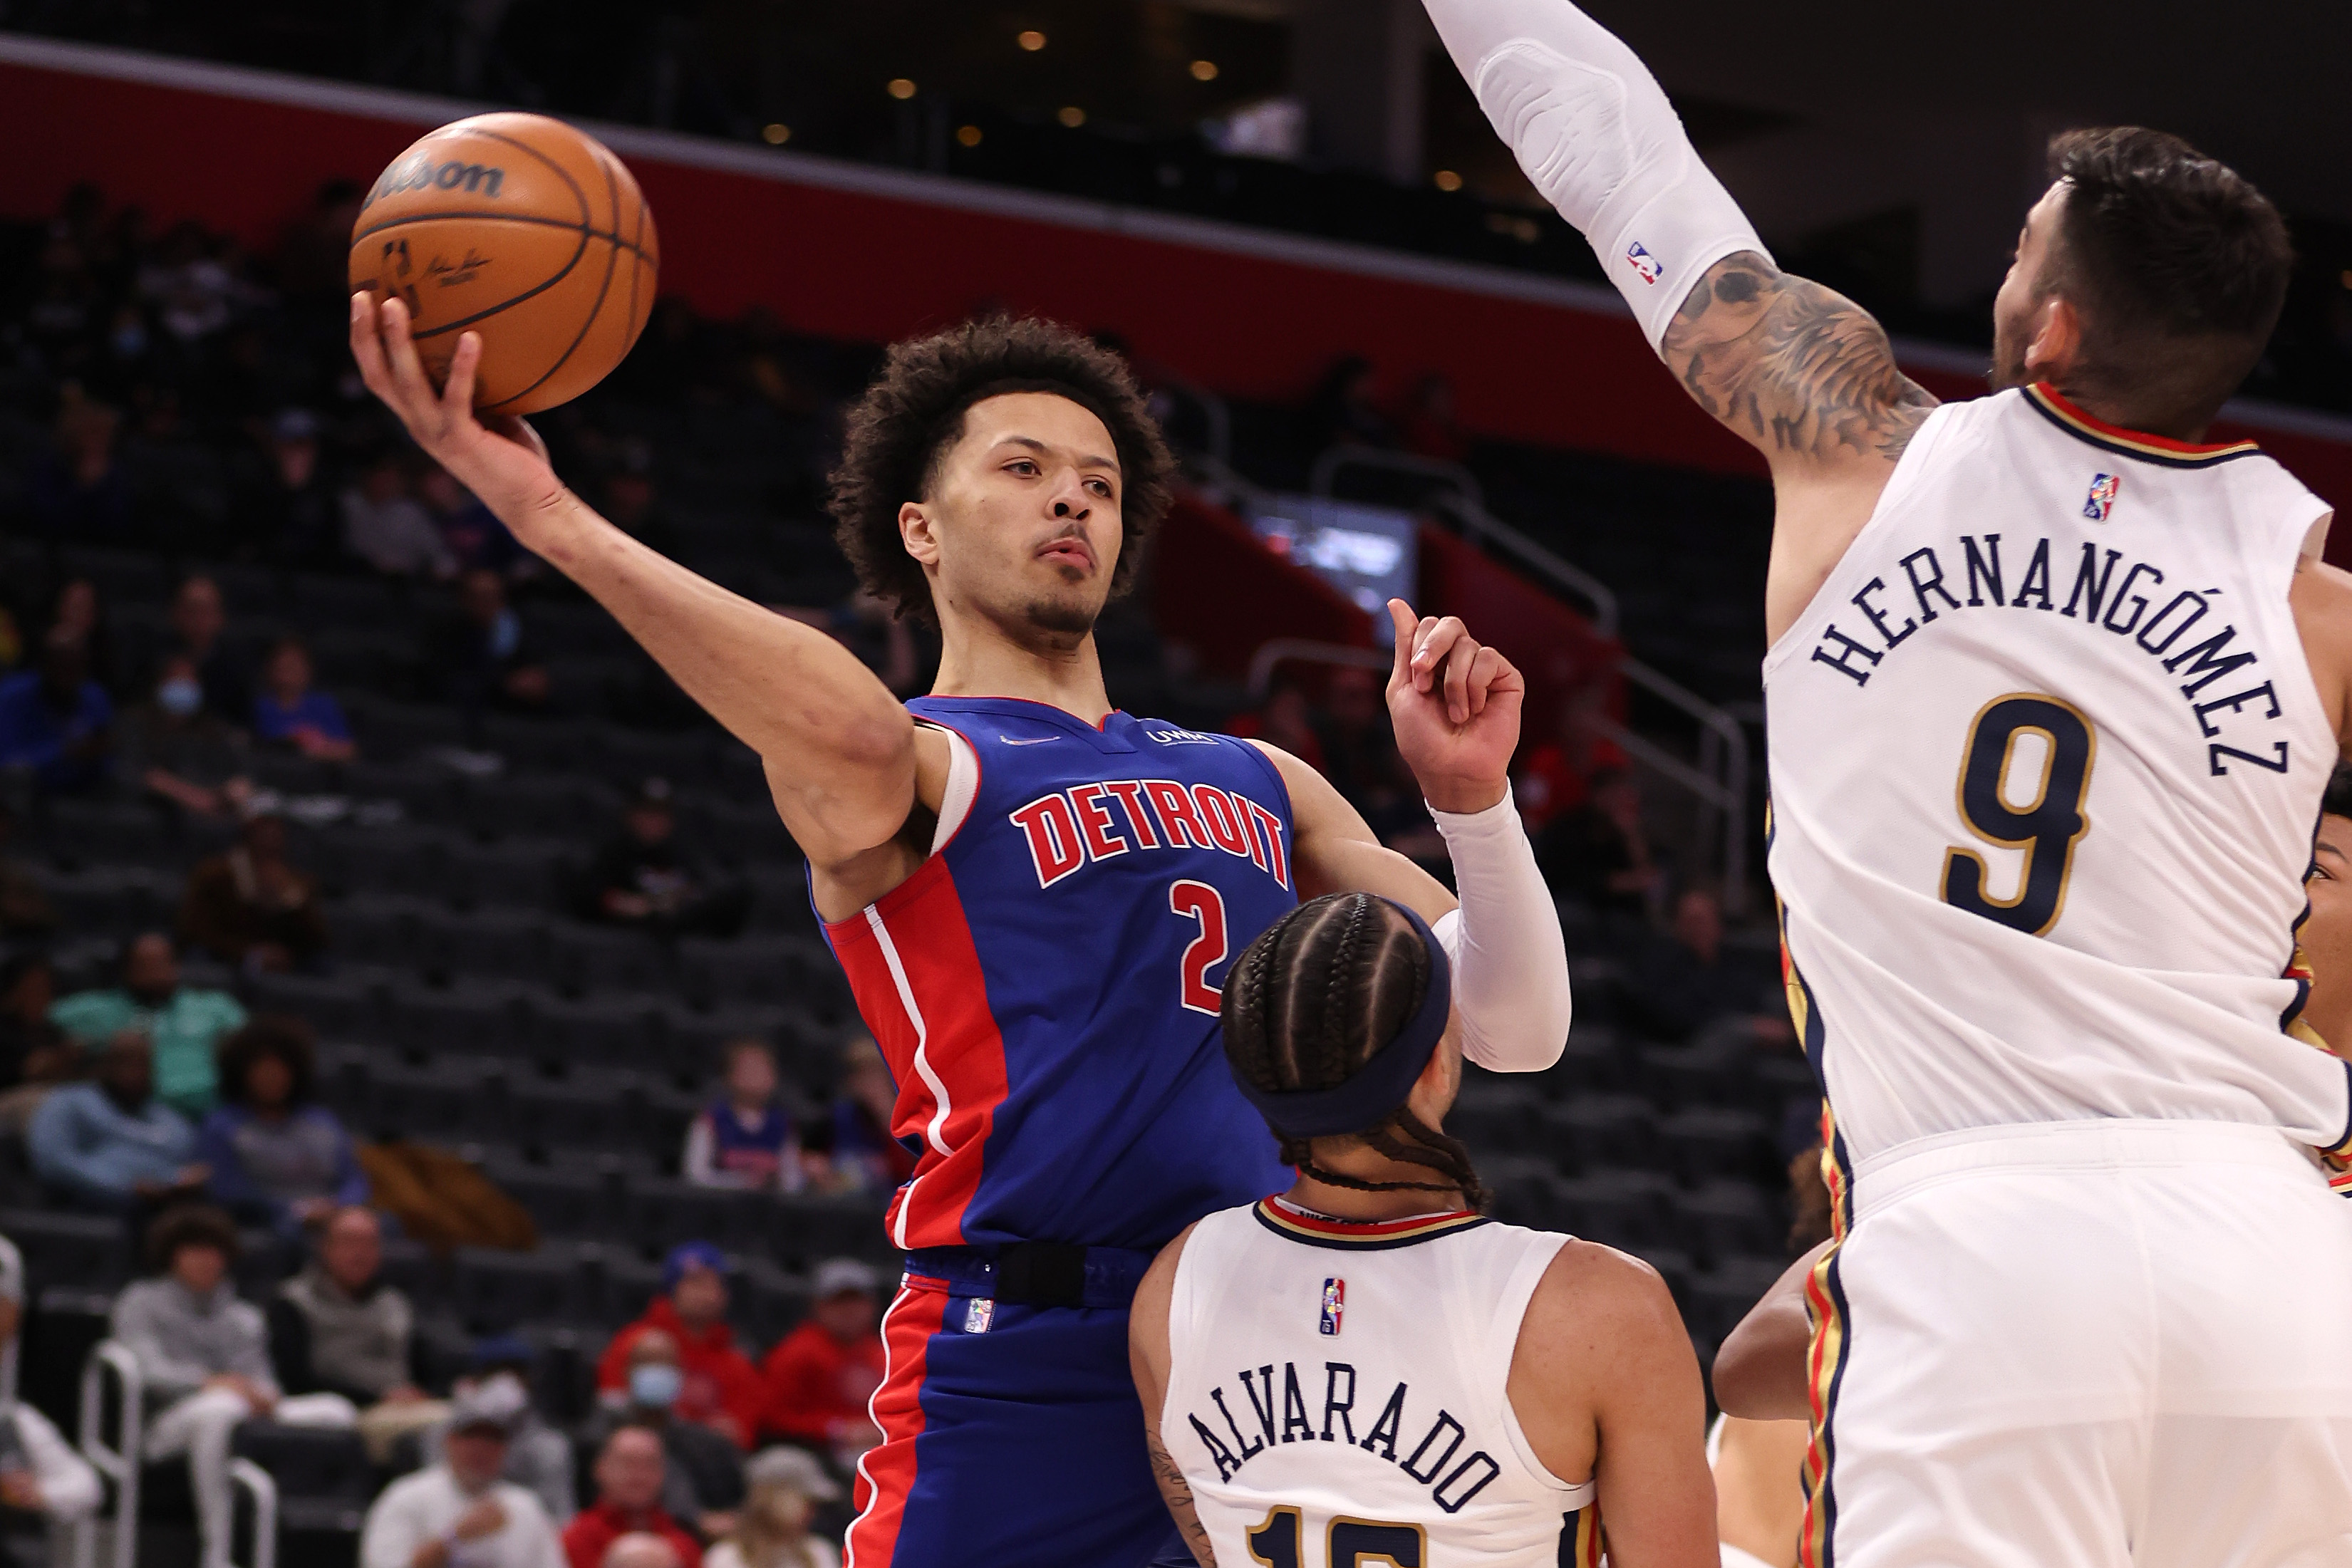 Detroit Pistons rookie Cade Cunningham looks to pass during an NBA game against the New Orleans Pelicans in February 2022